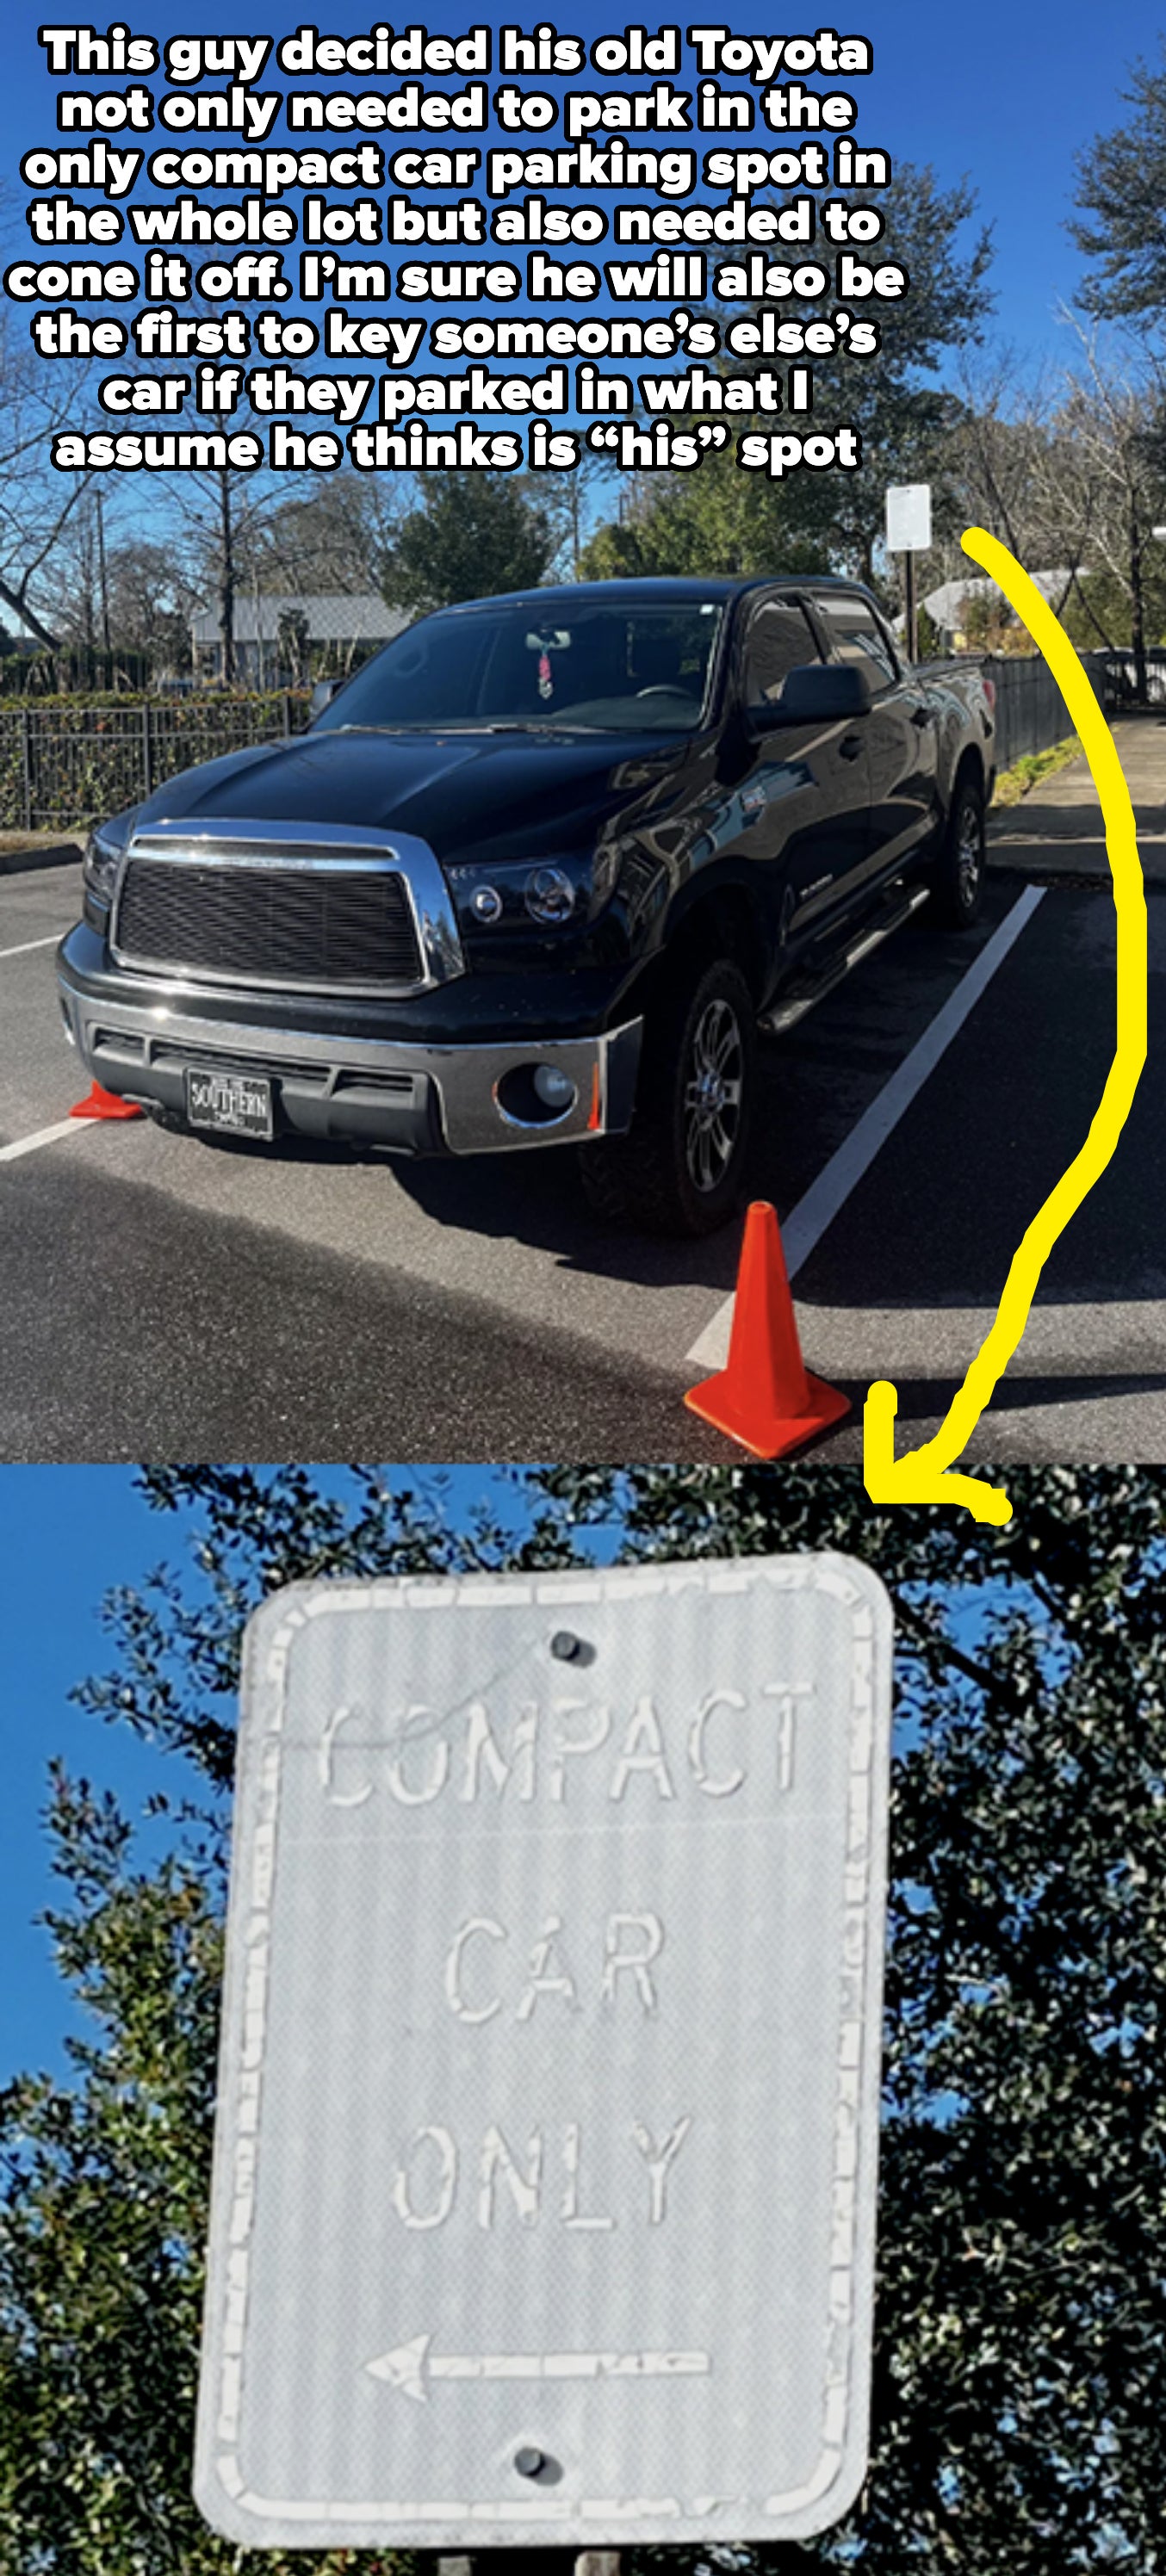 car parked under the compact car sign